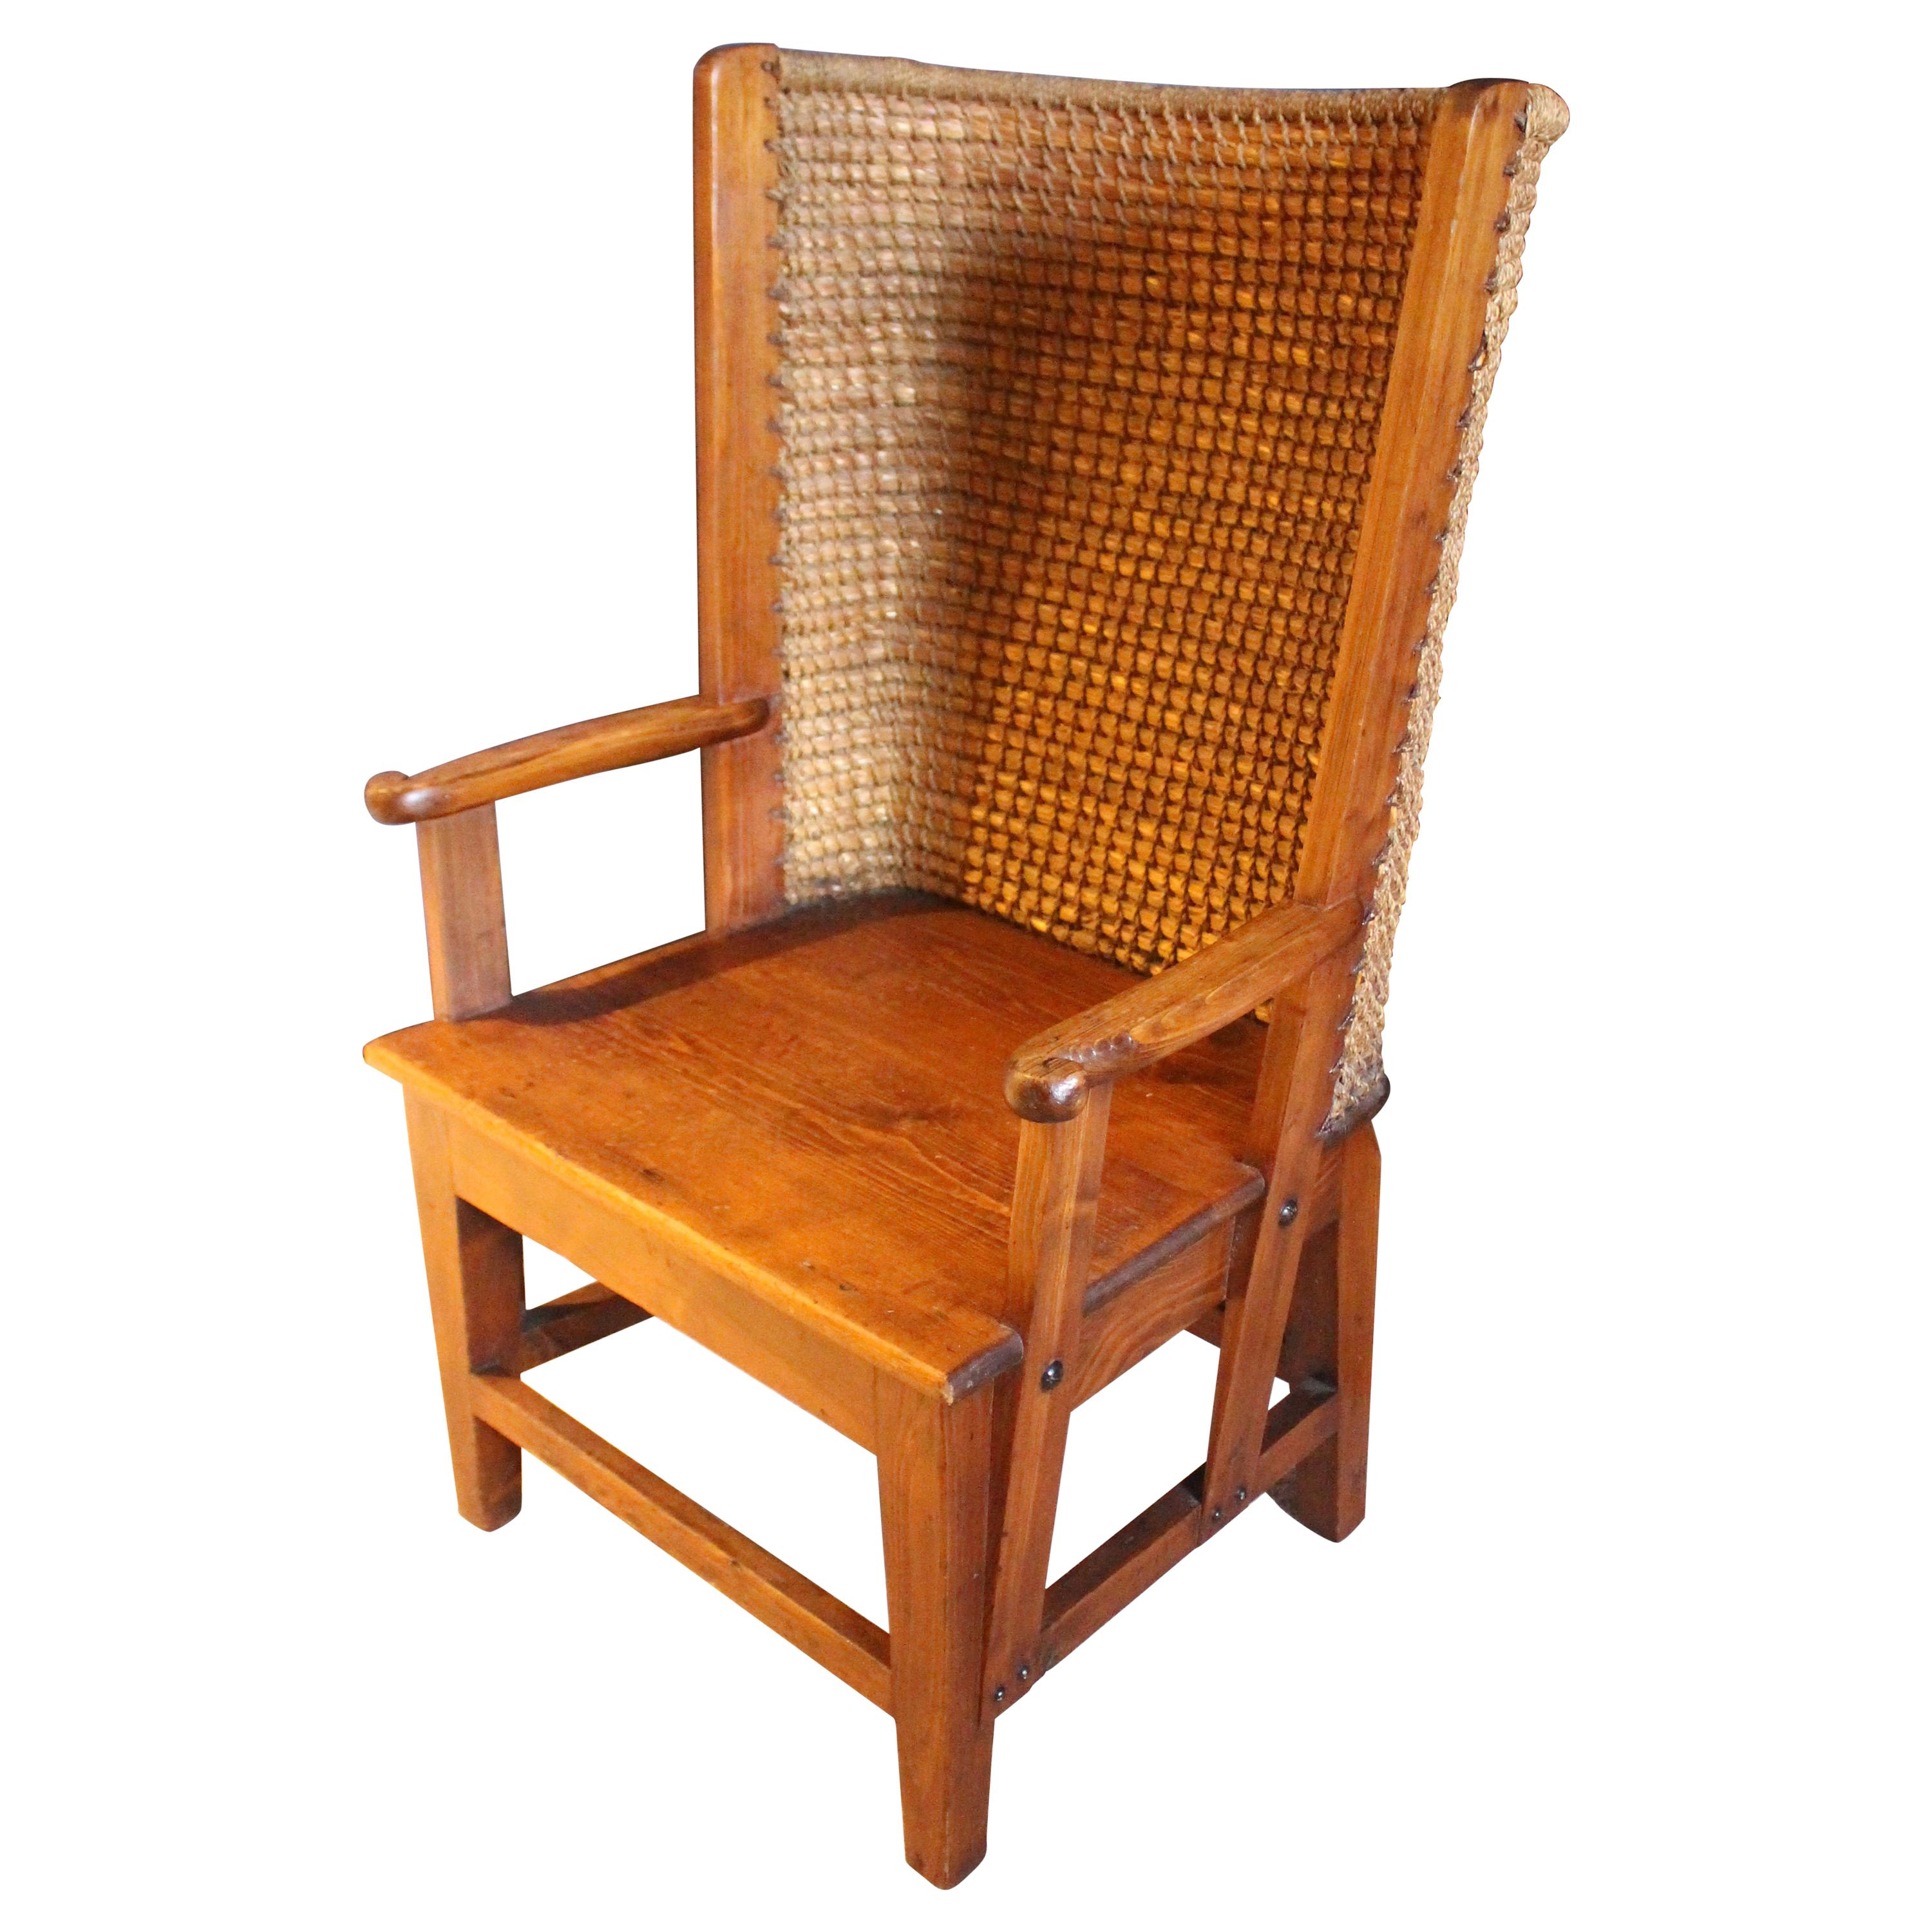 Ladies Pine Orkney Chair of Small Proportions, circa 1920